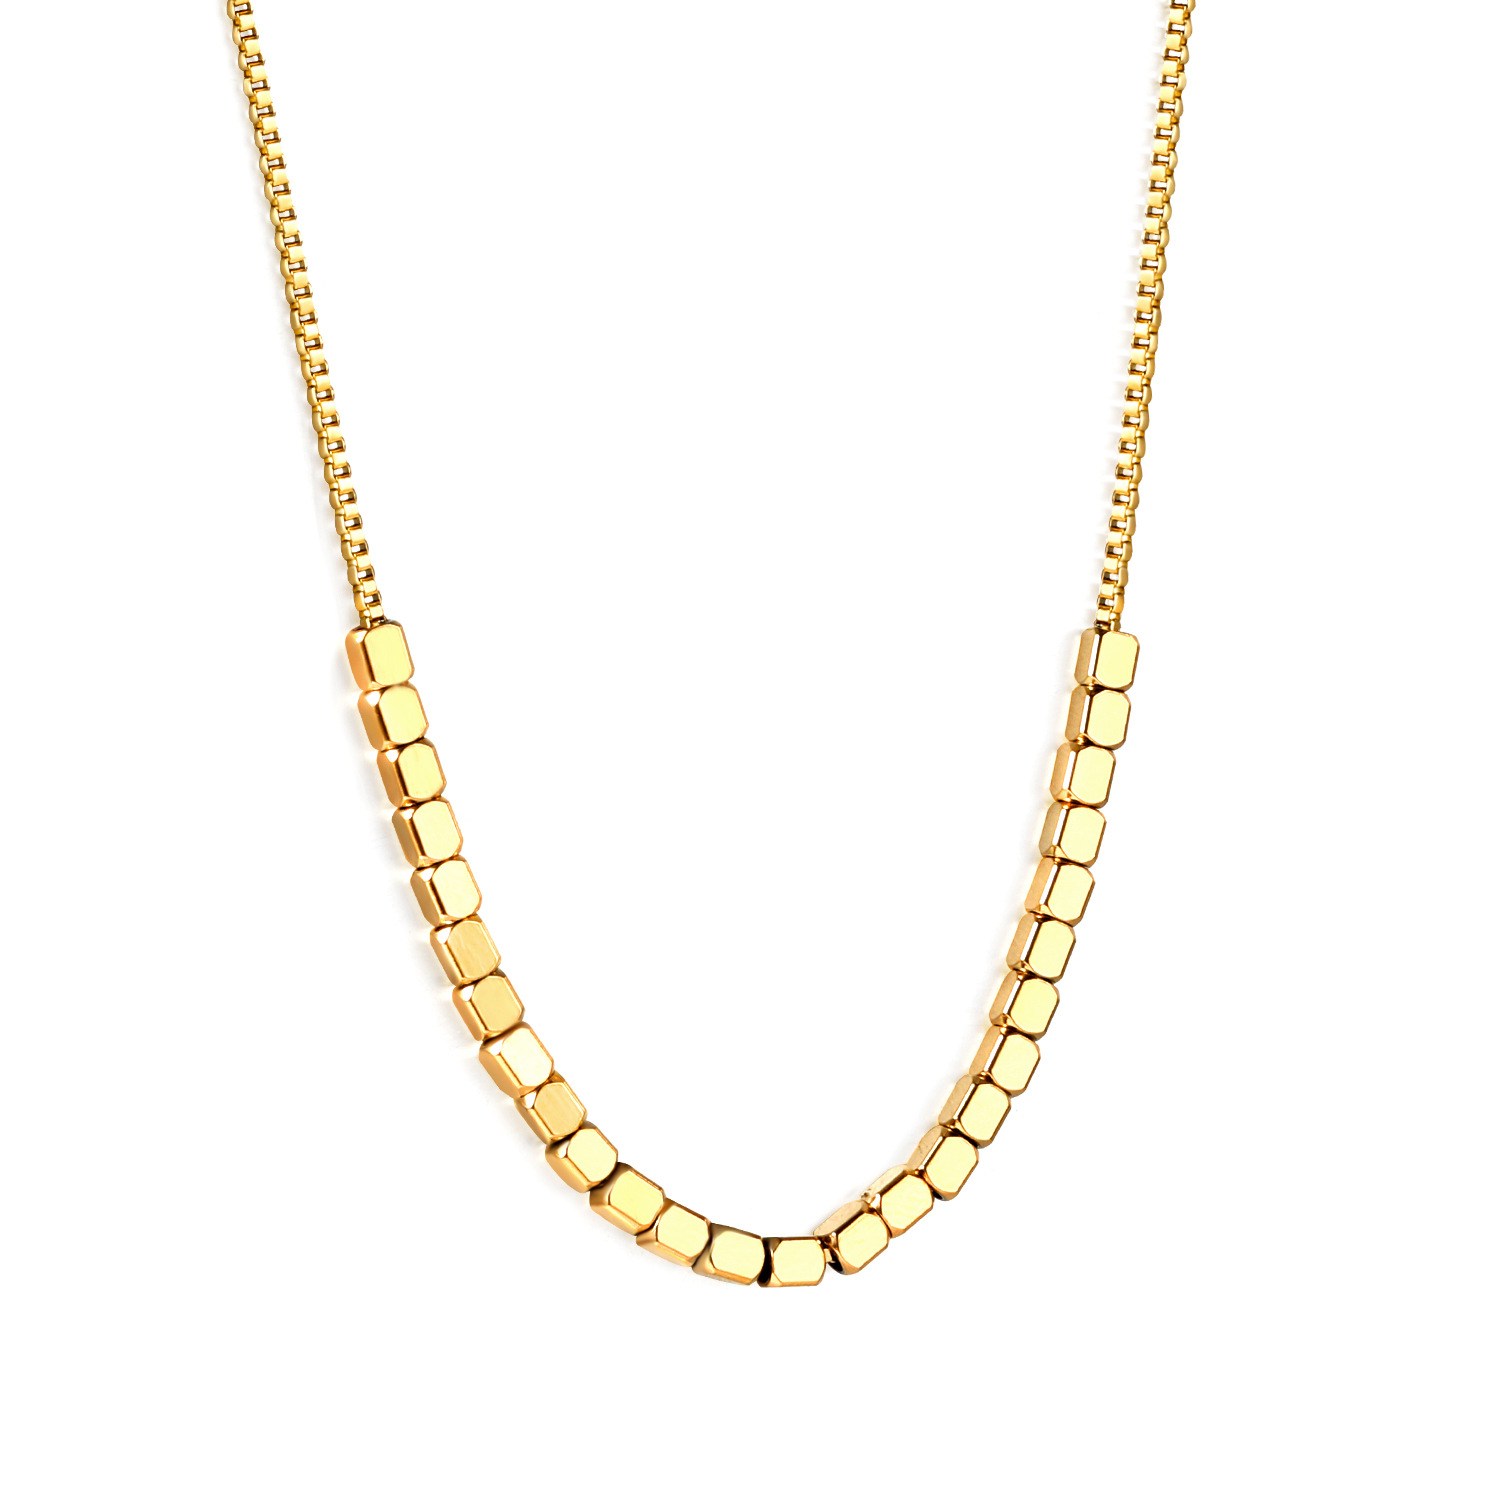 2:Small square necklace gold